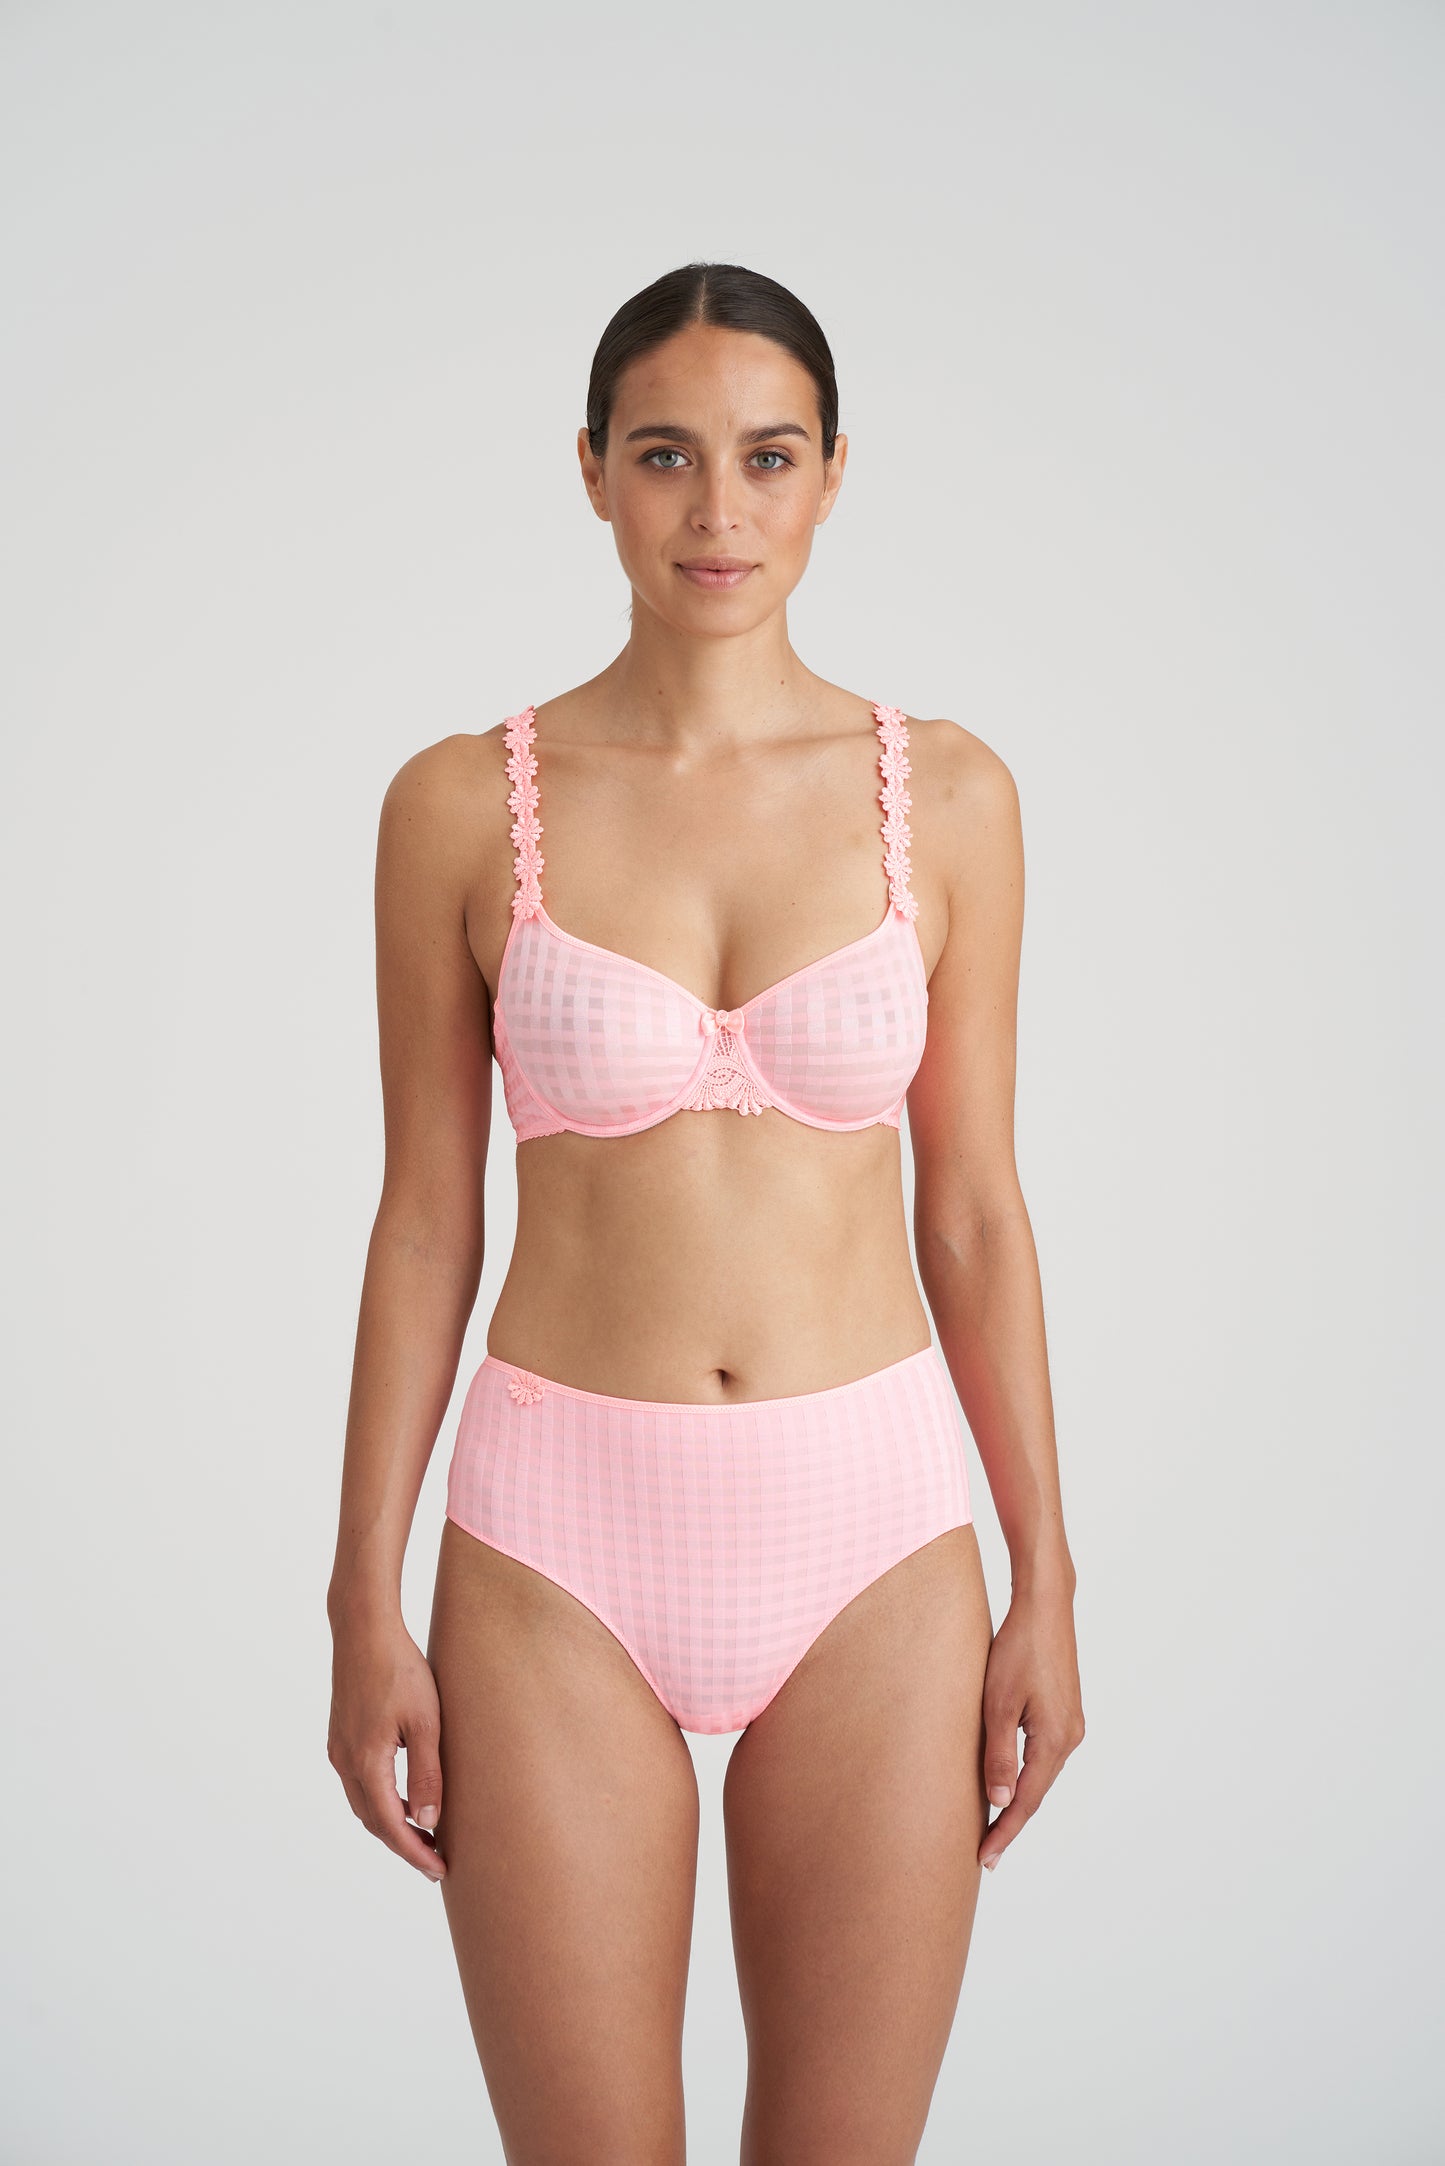 Marie Jo Avero volle cup bh naadloos Pink Parfait